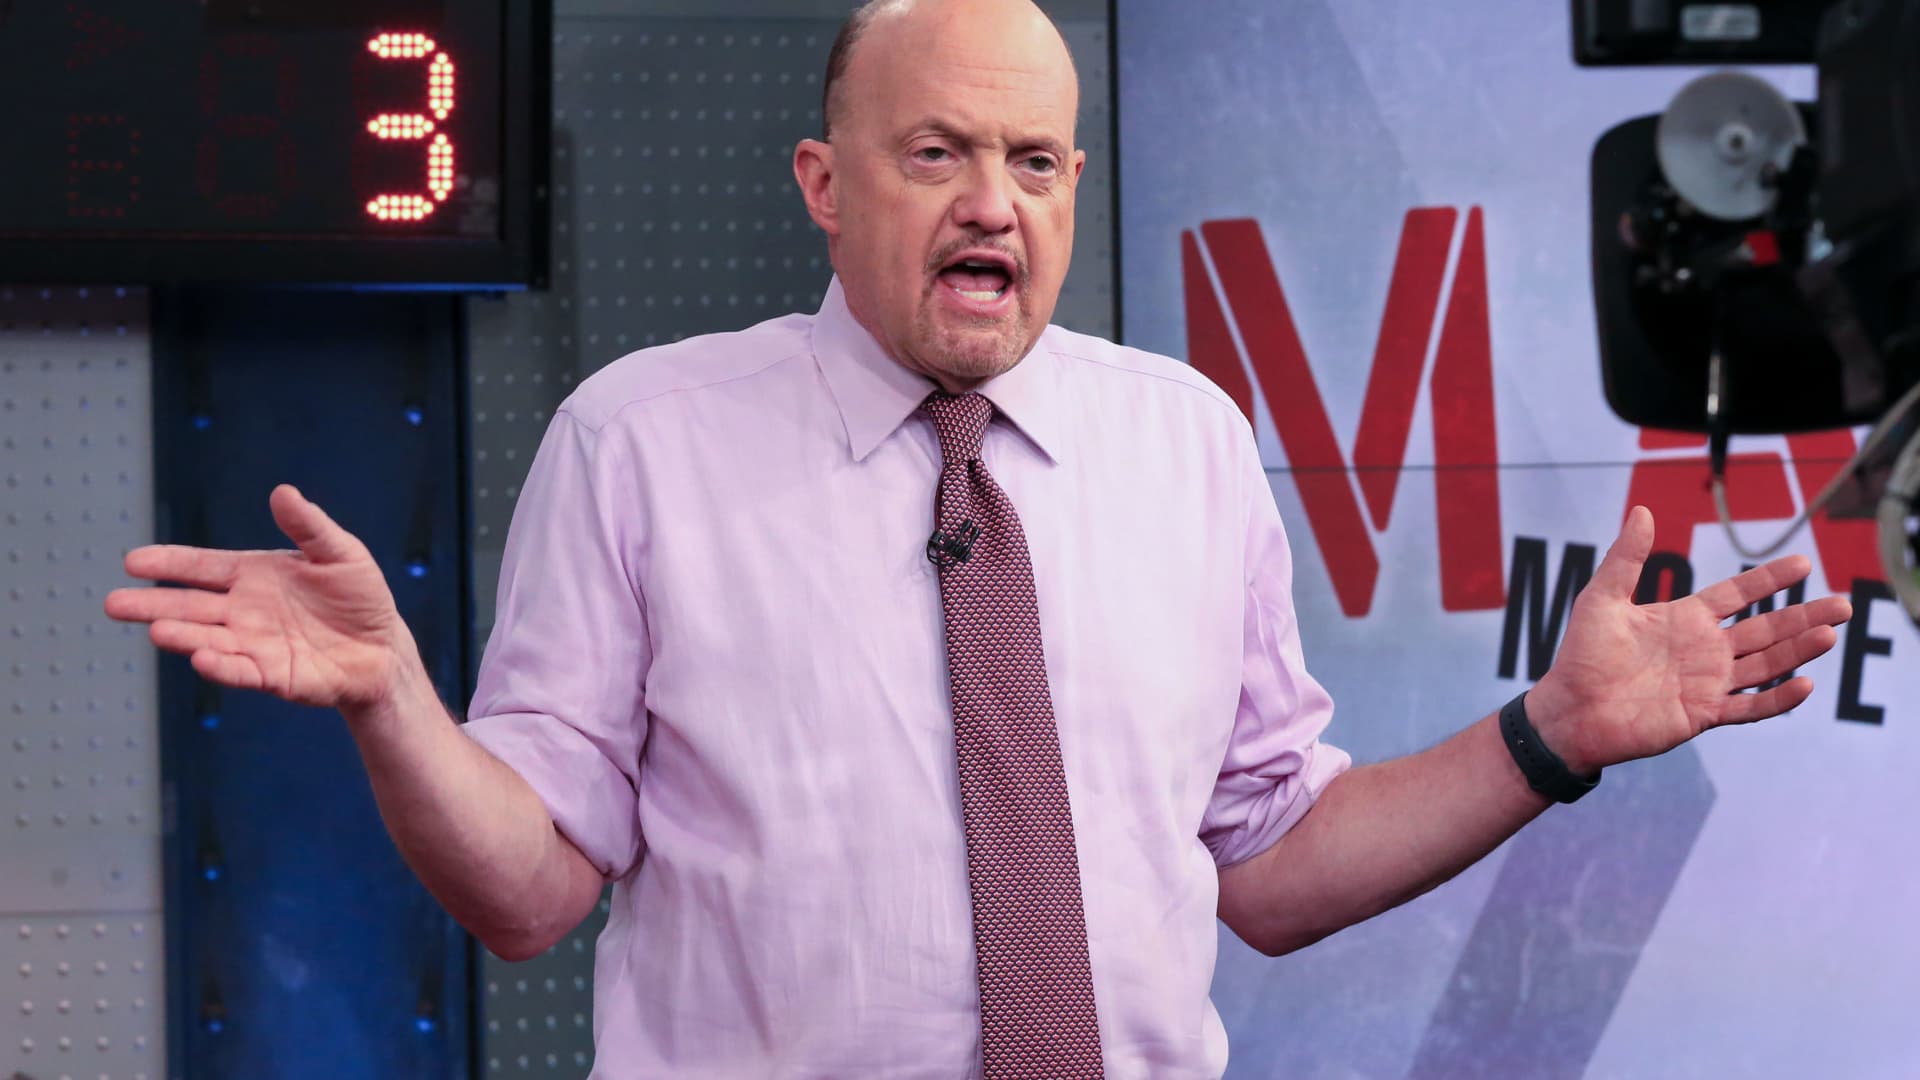 Jim Cramer warns investors not to bet too early on a soft landing